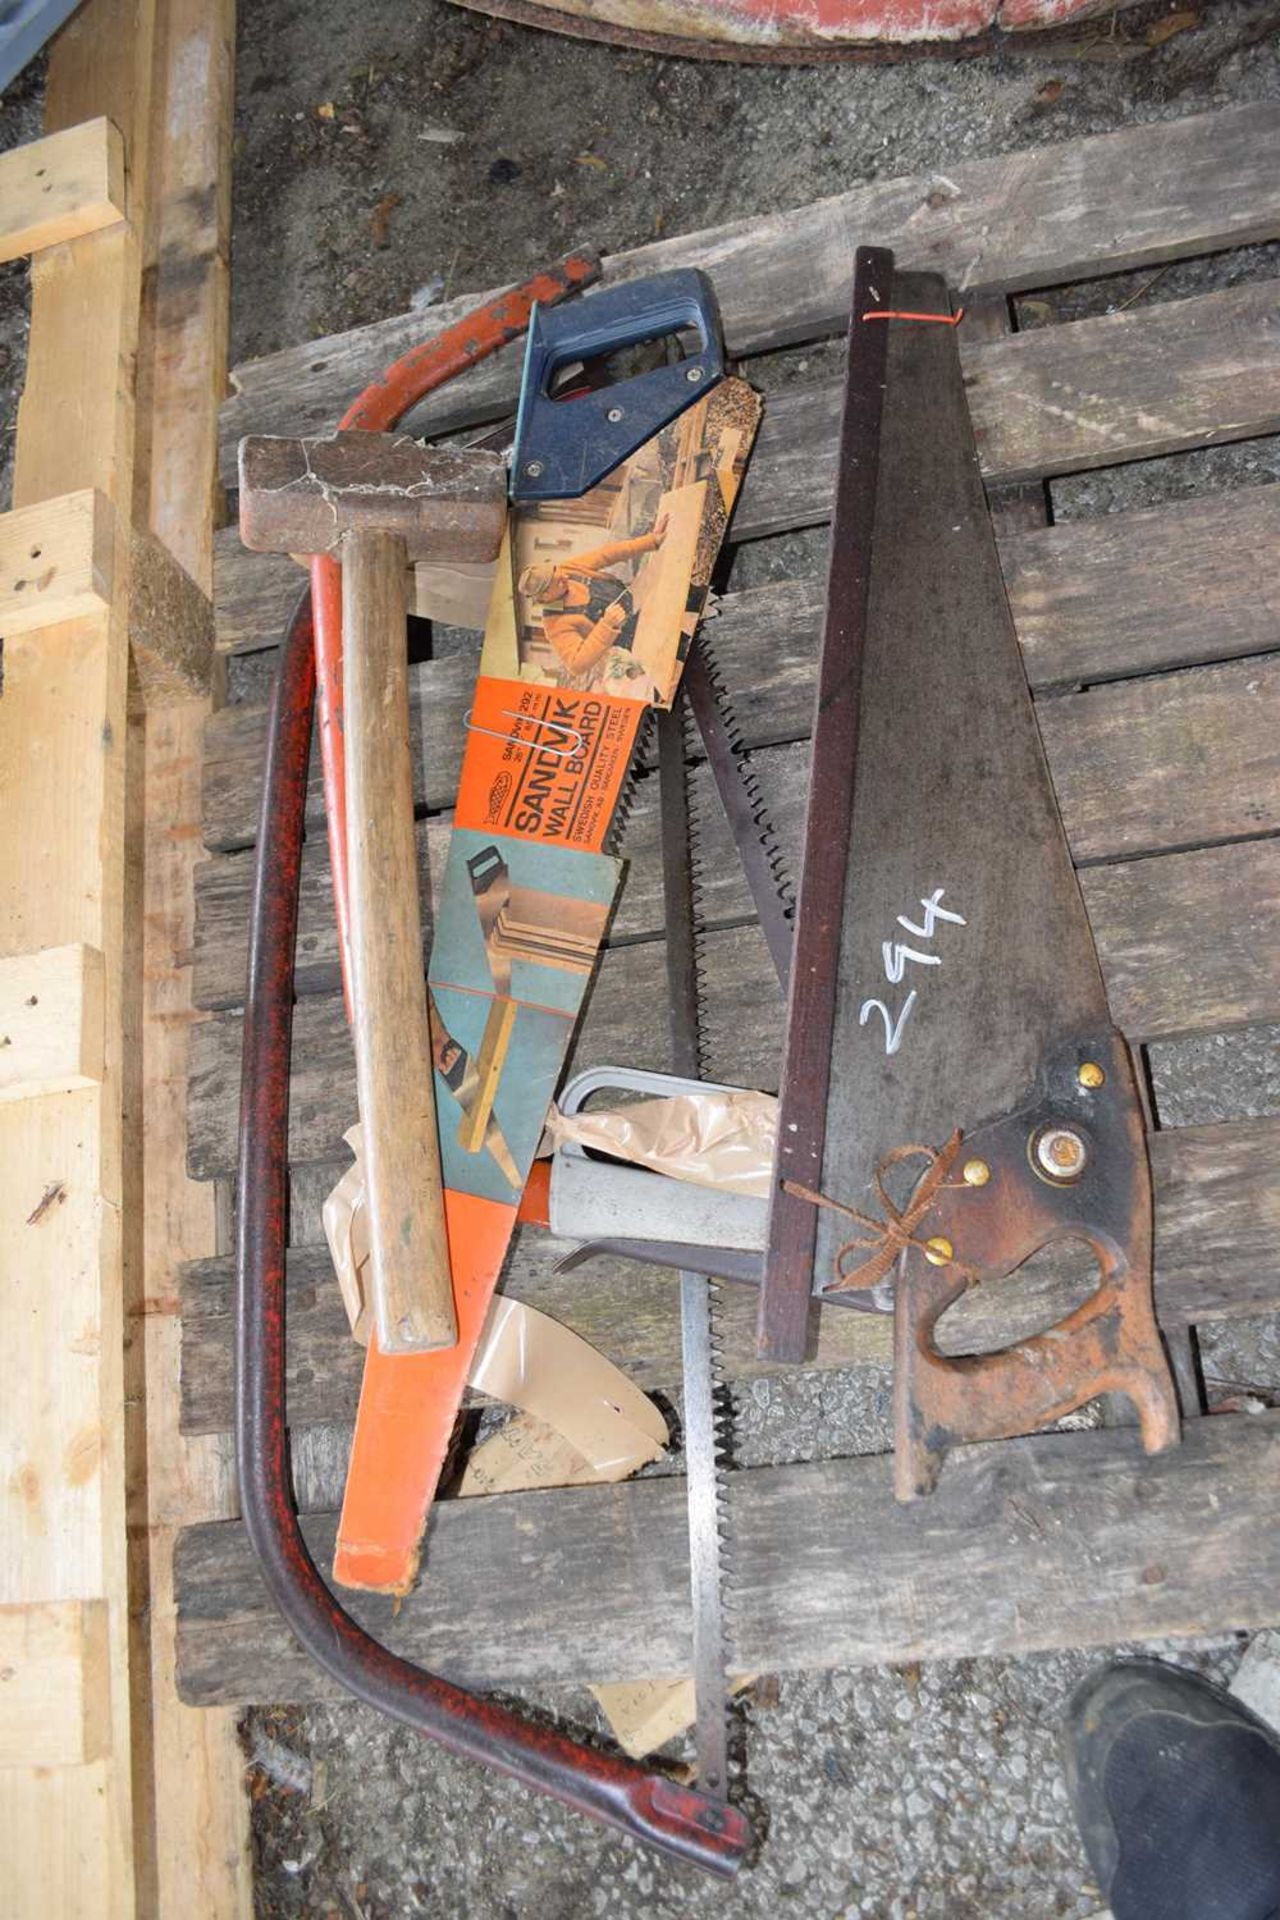 Quantity of hand saws and a sledge hammer